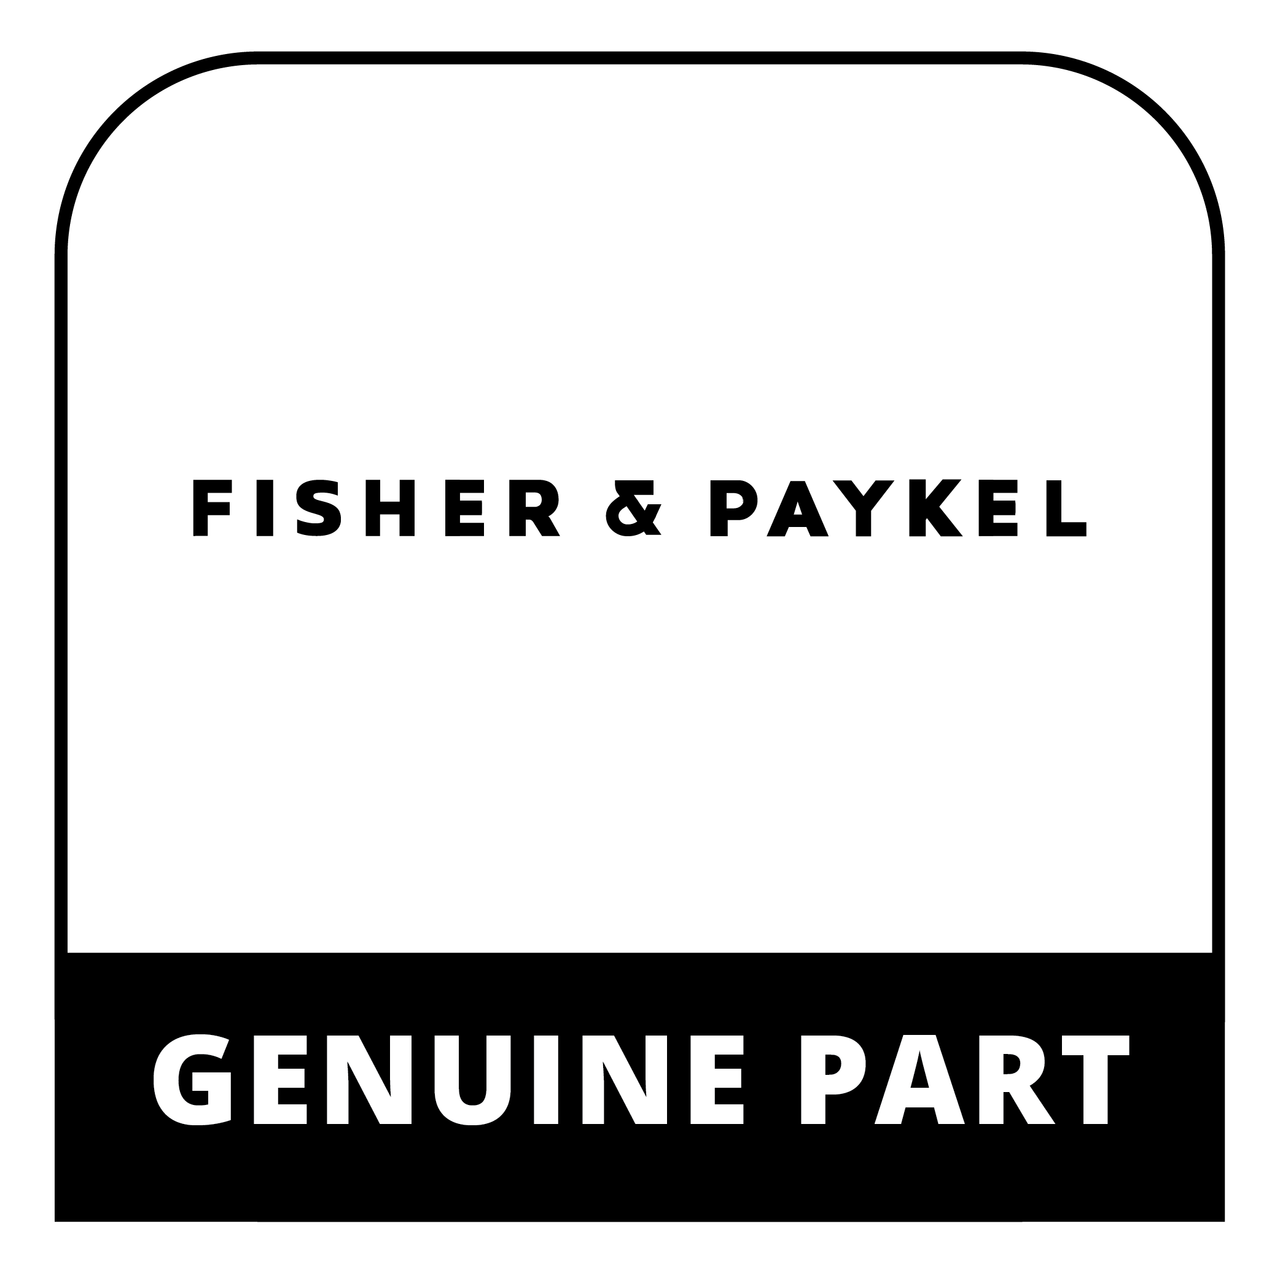 Fisher & Paykel 239315 - Fire Box Replacement Pin - Genuine Fisher & Paykel (DCS) Part